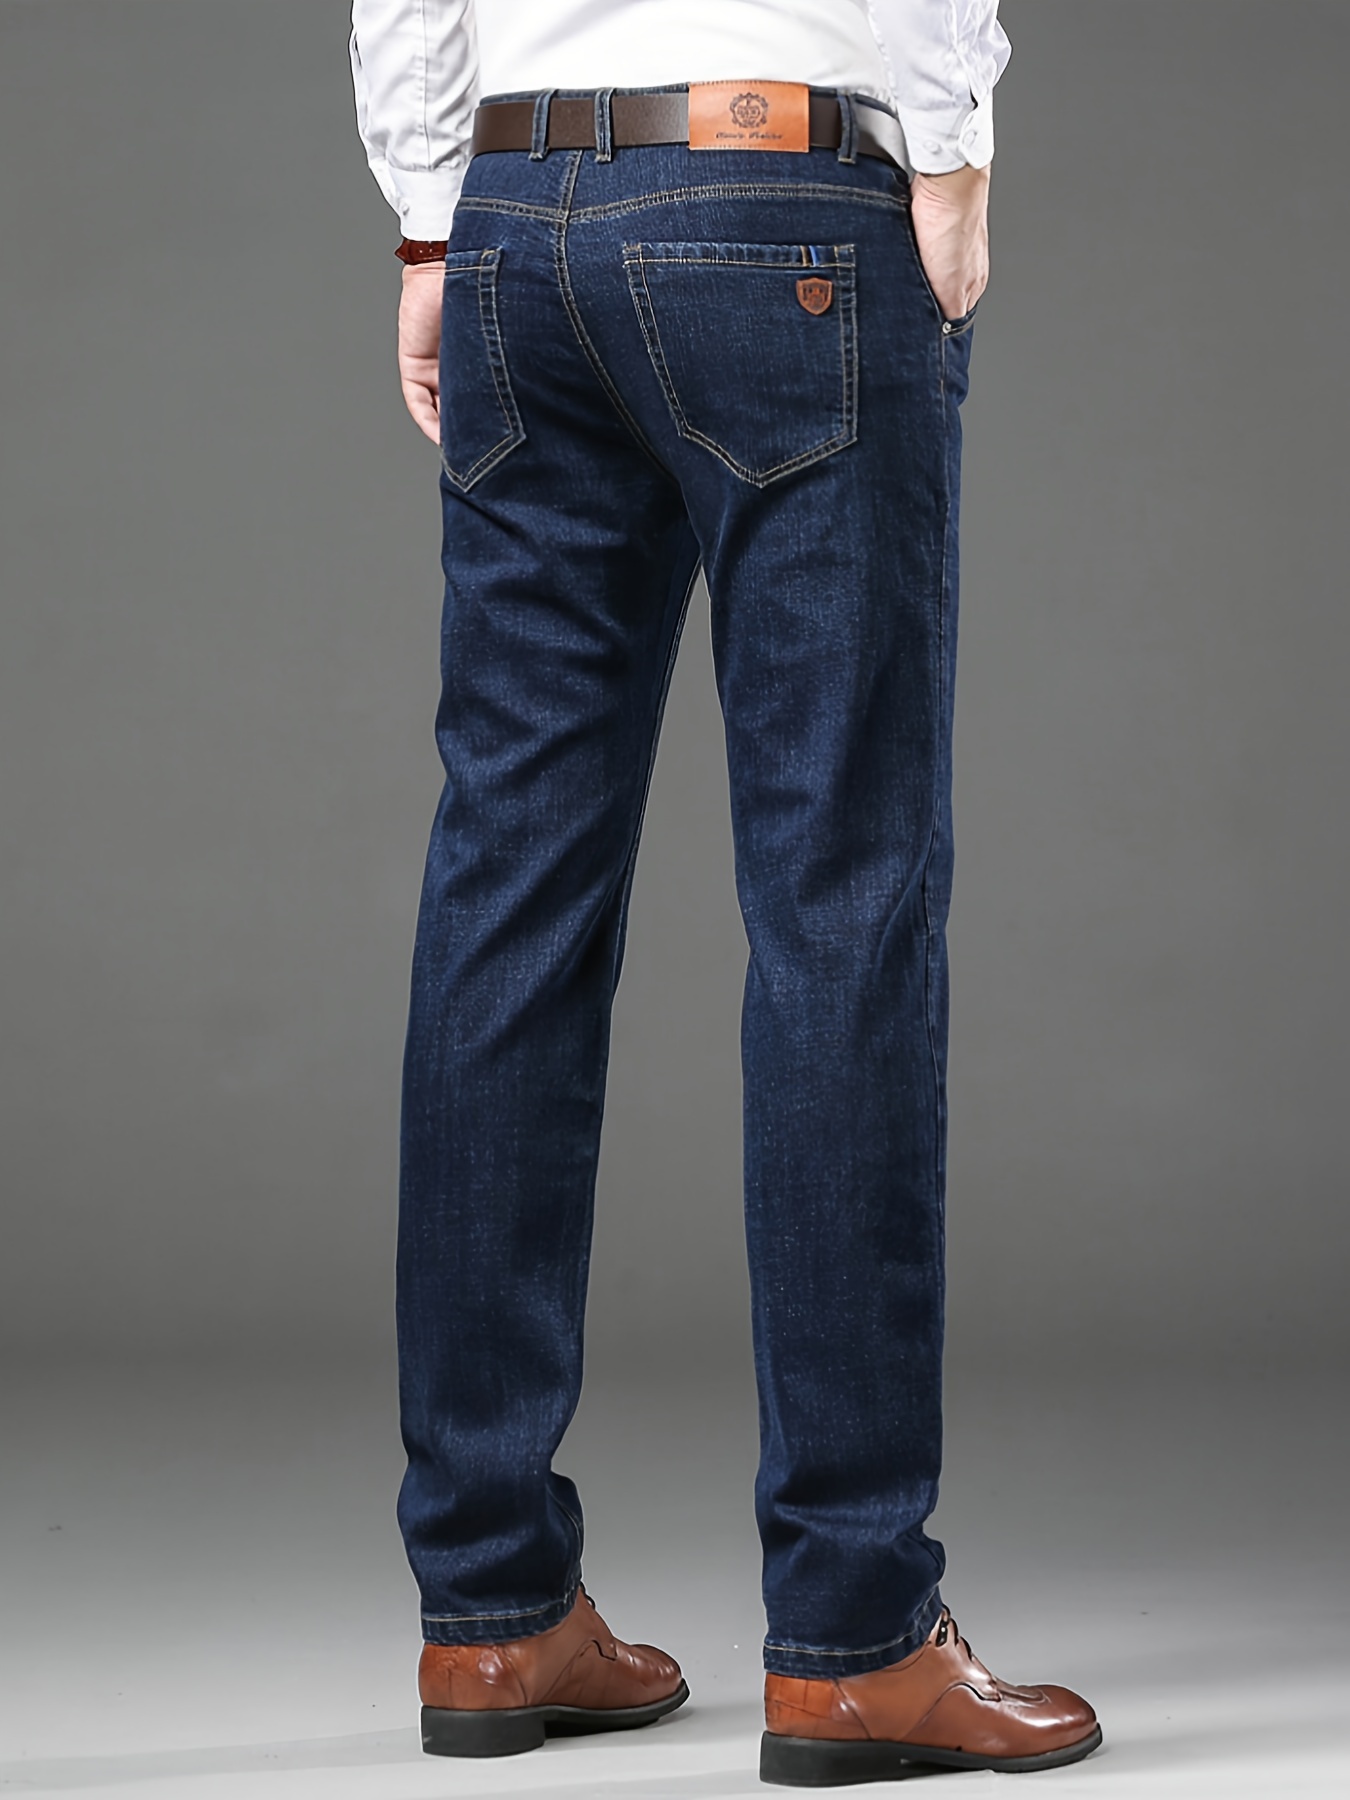 cotton blend mens solid slim fit denim jeans with pockets all seasons outdoor leisure work